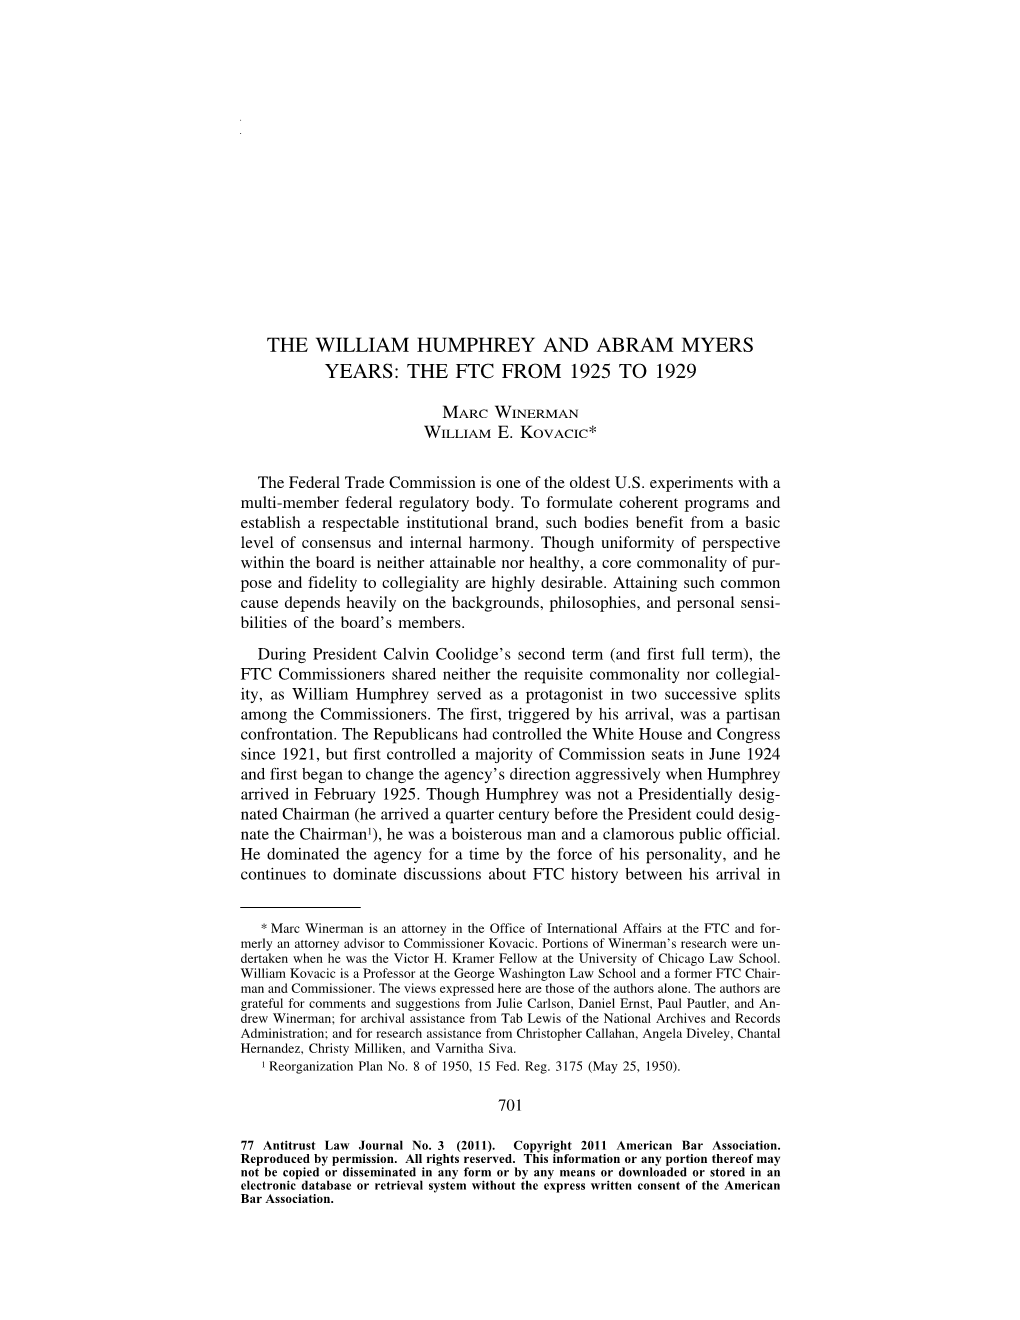 The Ftc from 1925 to 1929